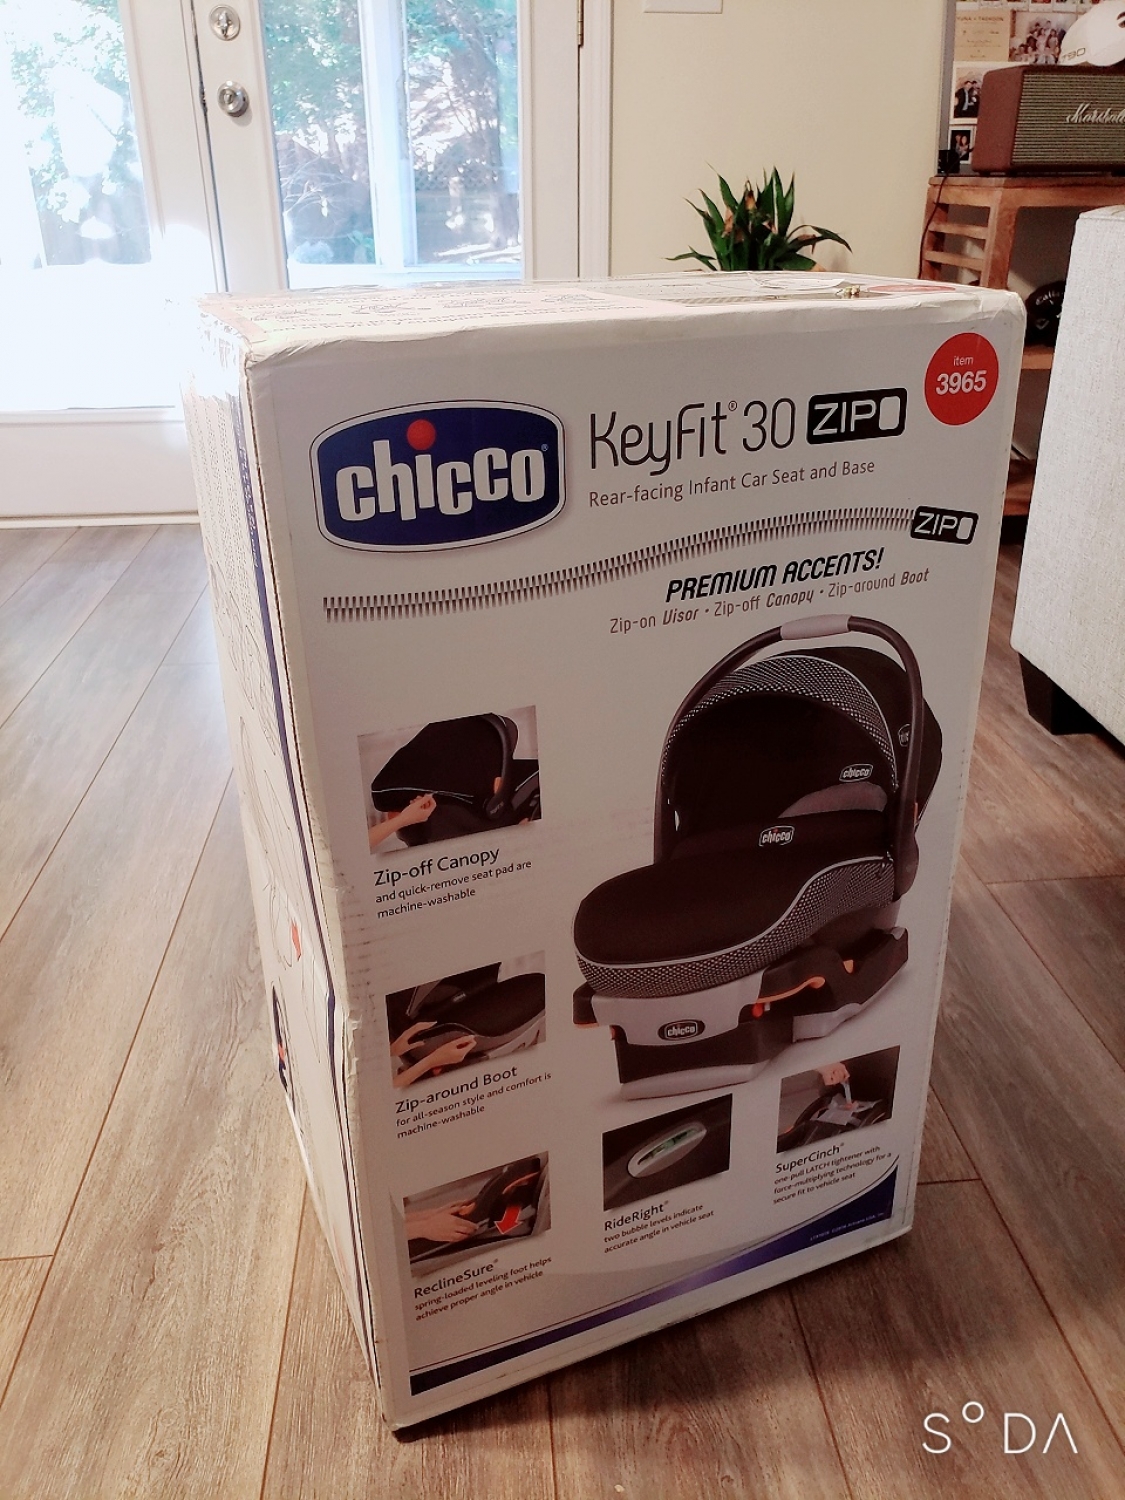 Chicco KeyFit 30 Zip Air Infant Car Seat Surf